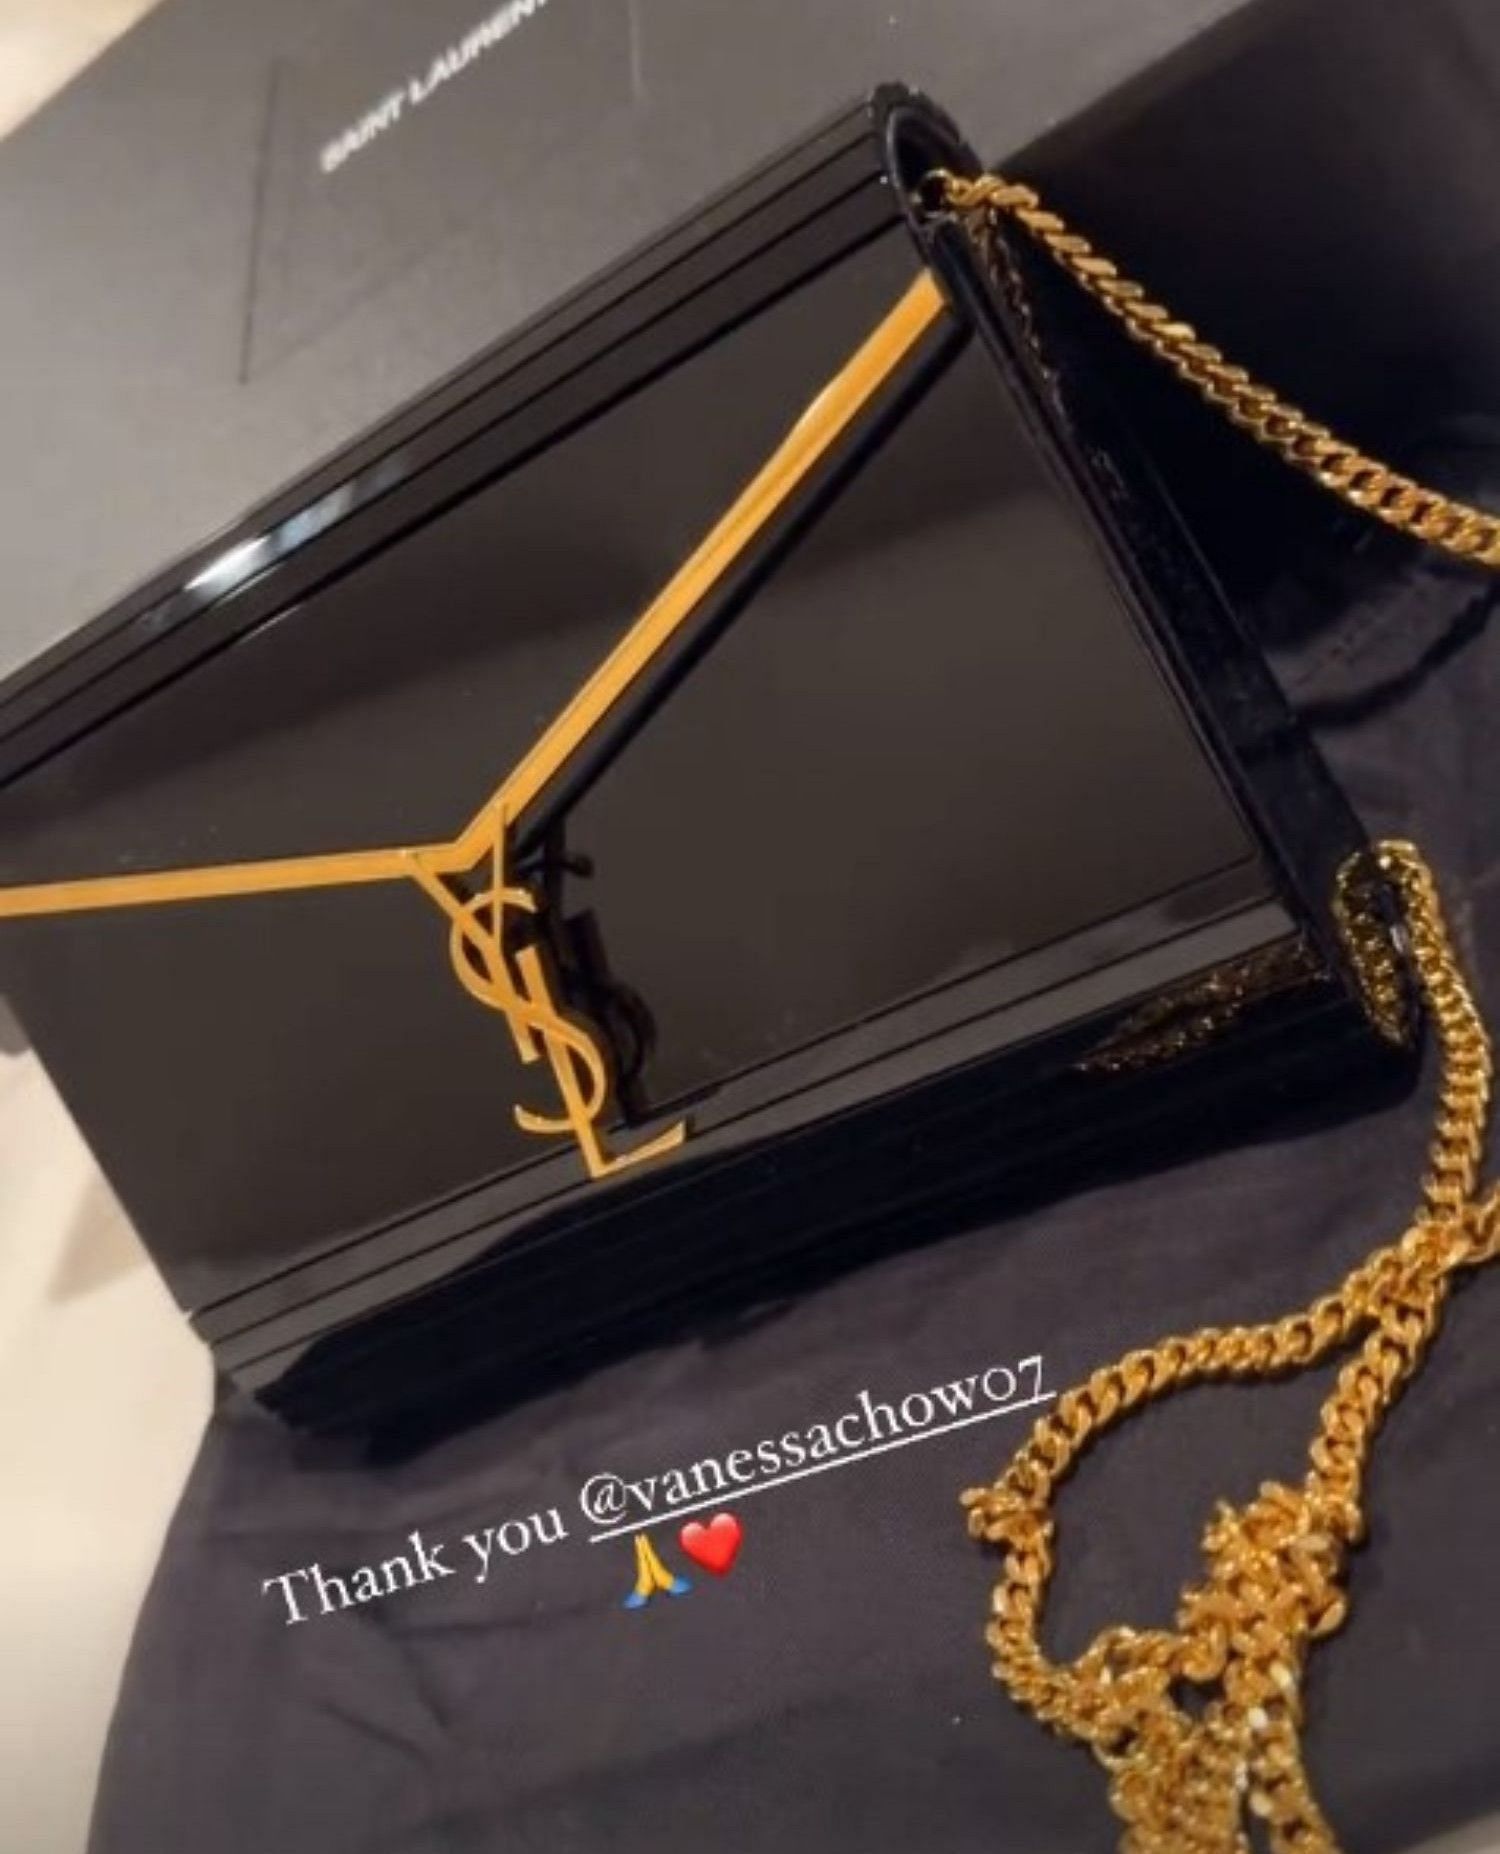 The YSL shoulder bag that Mandana Bolourchi received from Vanessa Chow for her birthday.